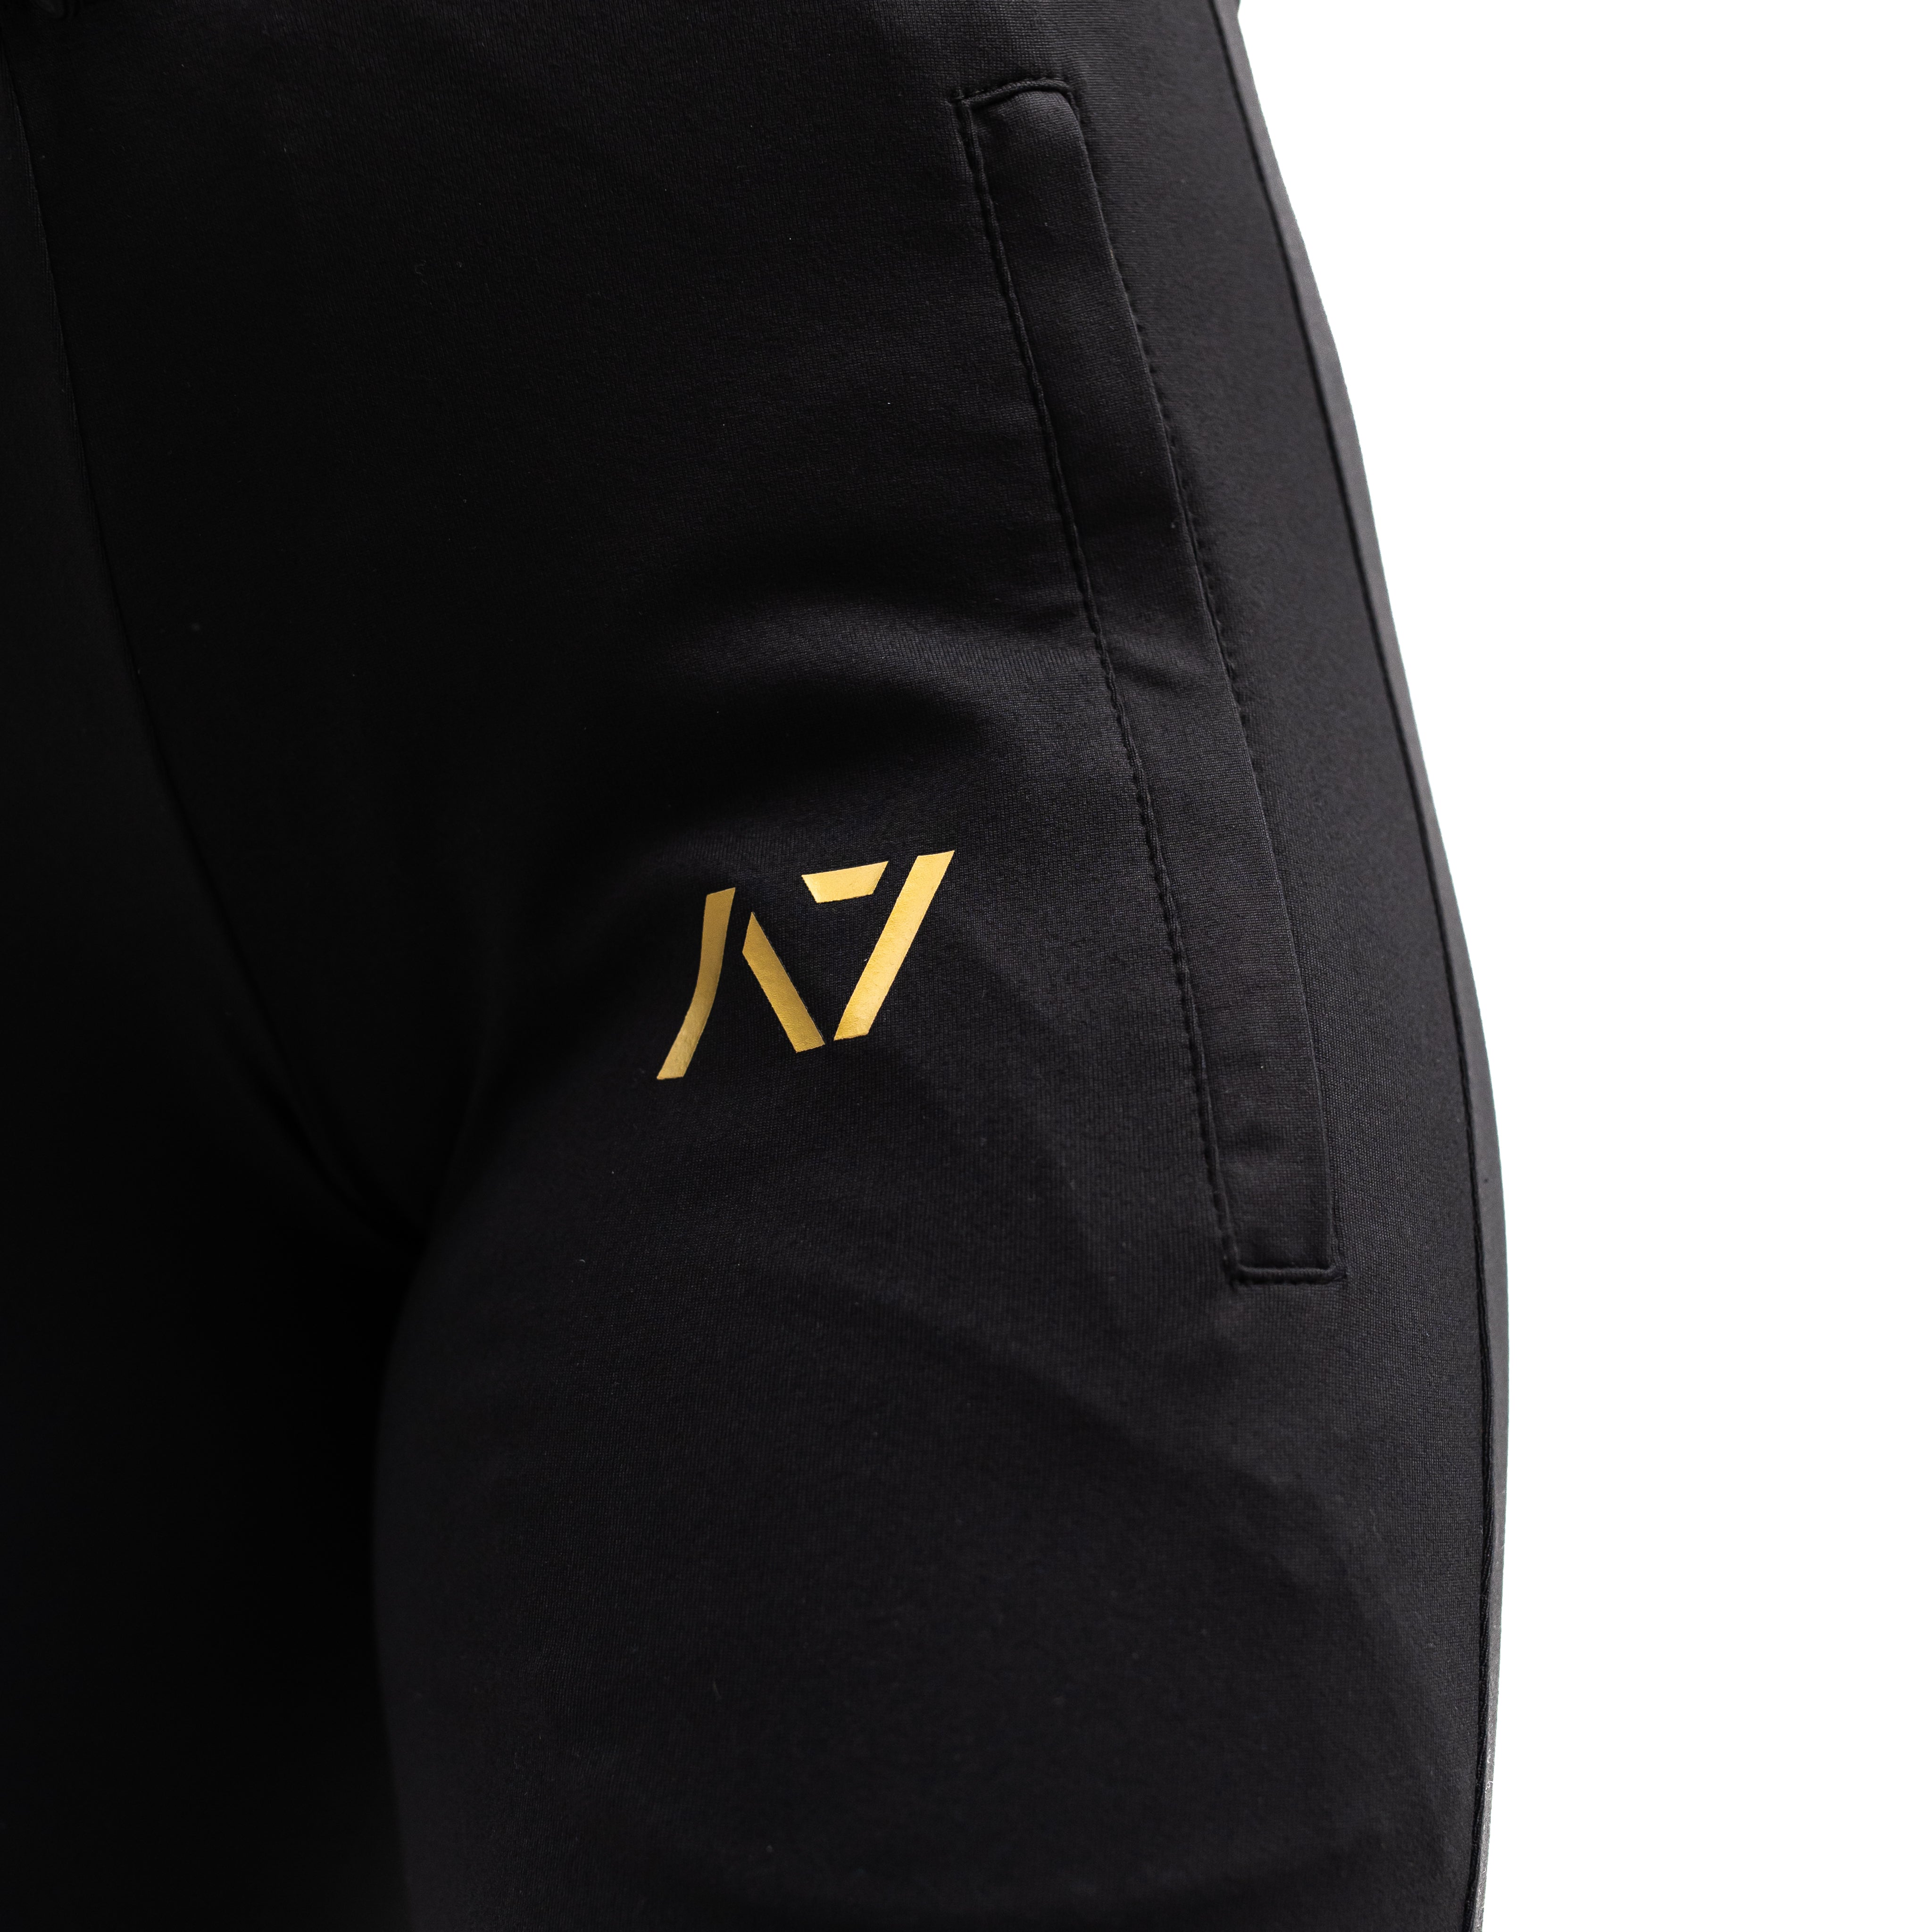 Gold Standard Defy joggers are just as comfortable in the gym as they are going out. These are made with premium moisture-wicking 4-way-stretch material for greater range of motion. These are a great fit for both men and women and offer deep zippered pockets and tapered leg design. Purchase Gold Standard Defy Joggers from A7 UK shipping to UK or A7 Europe shipping to EU.